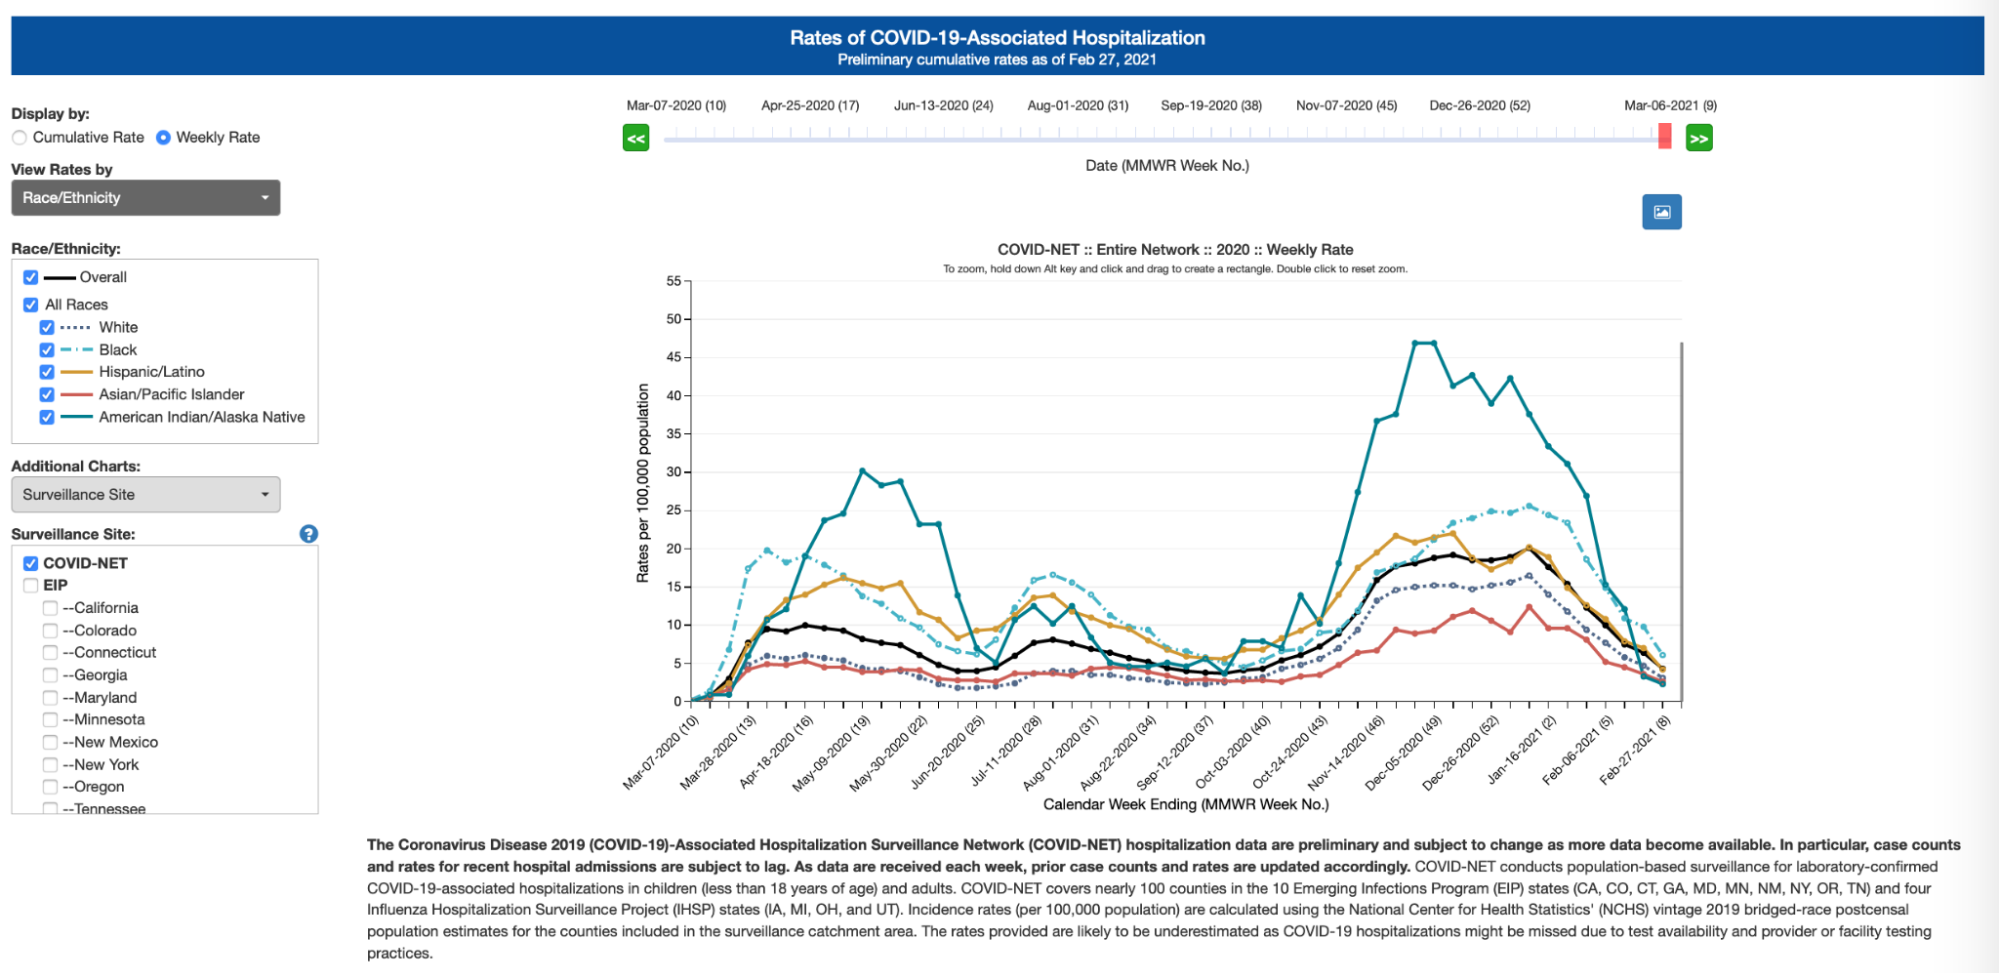  Line graph showing weekly rates of COVID-19-Associated Hospitalization by race/ethnicity from March 2020 through March 2021. Rates of hospitalization for each group show a rough correlation, with the highest peak in Dec 2020 / Jan 2021,  a smaller peak in spring 2020, and the smallest peak in summer 2020.